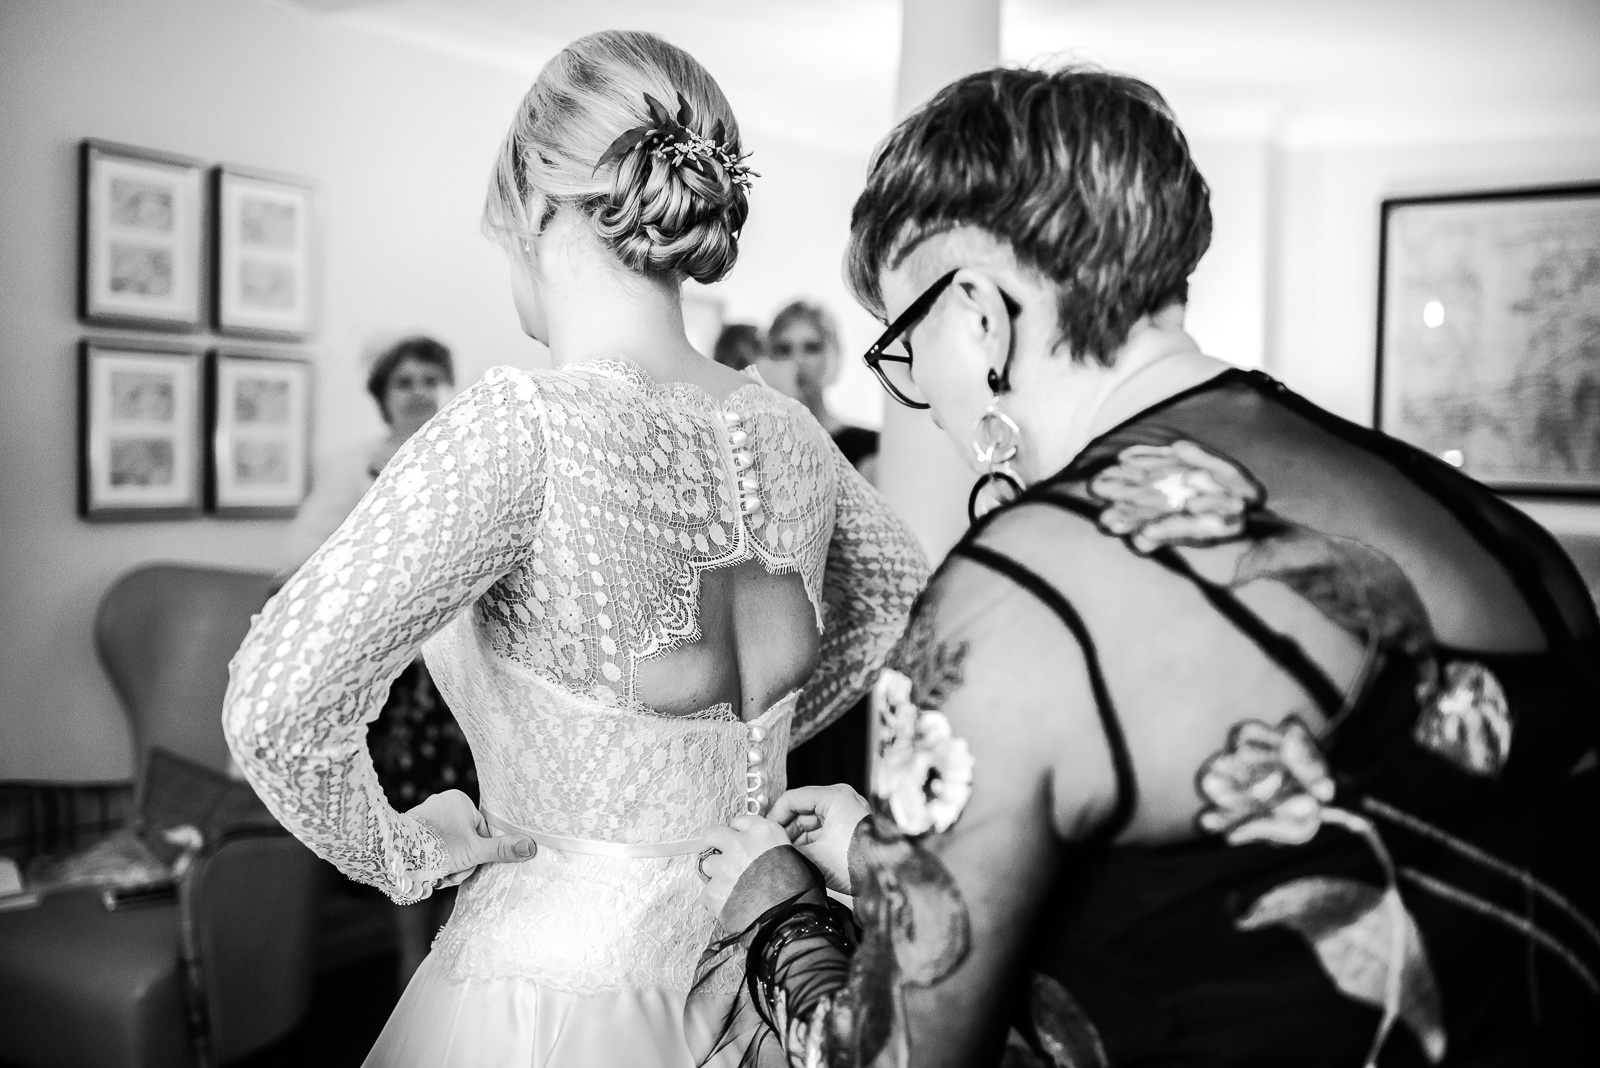 Black and white candid photography of bride getting ready for her wedding.